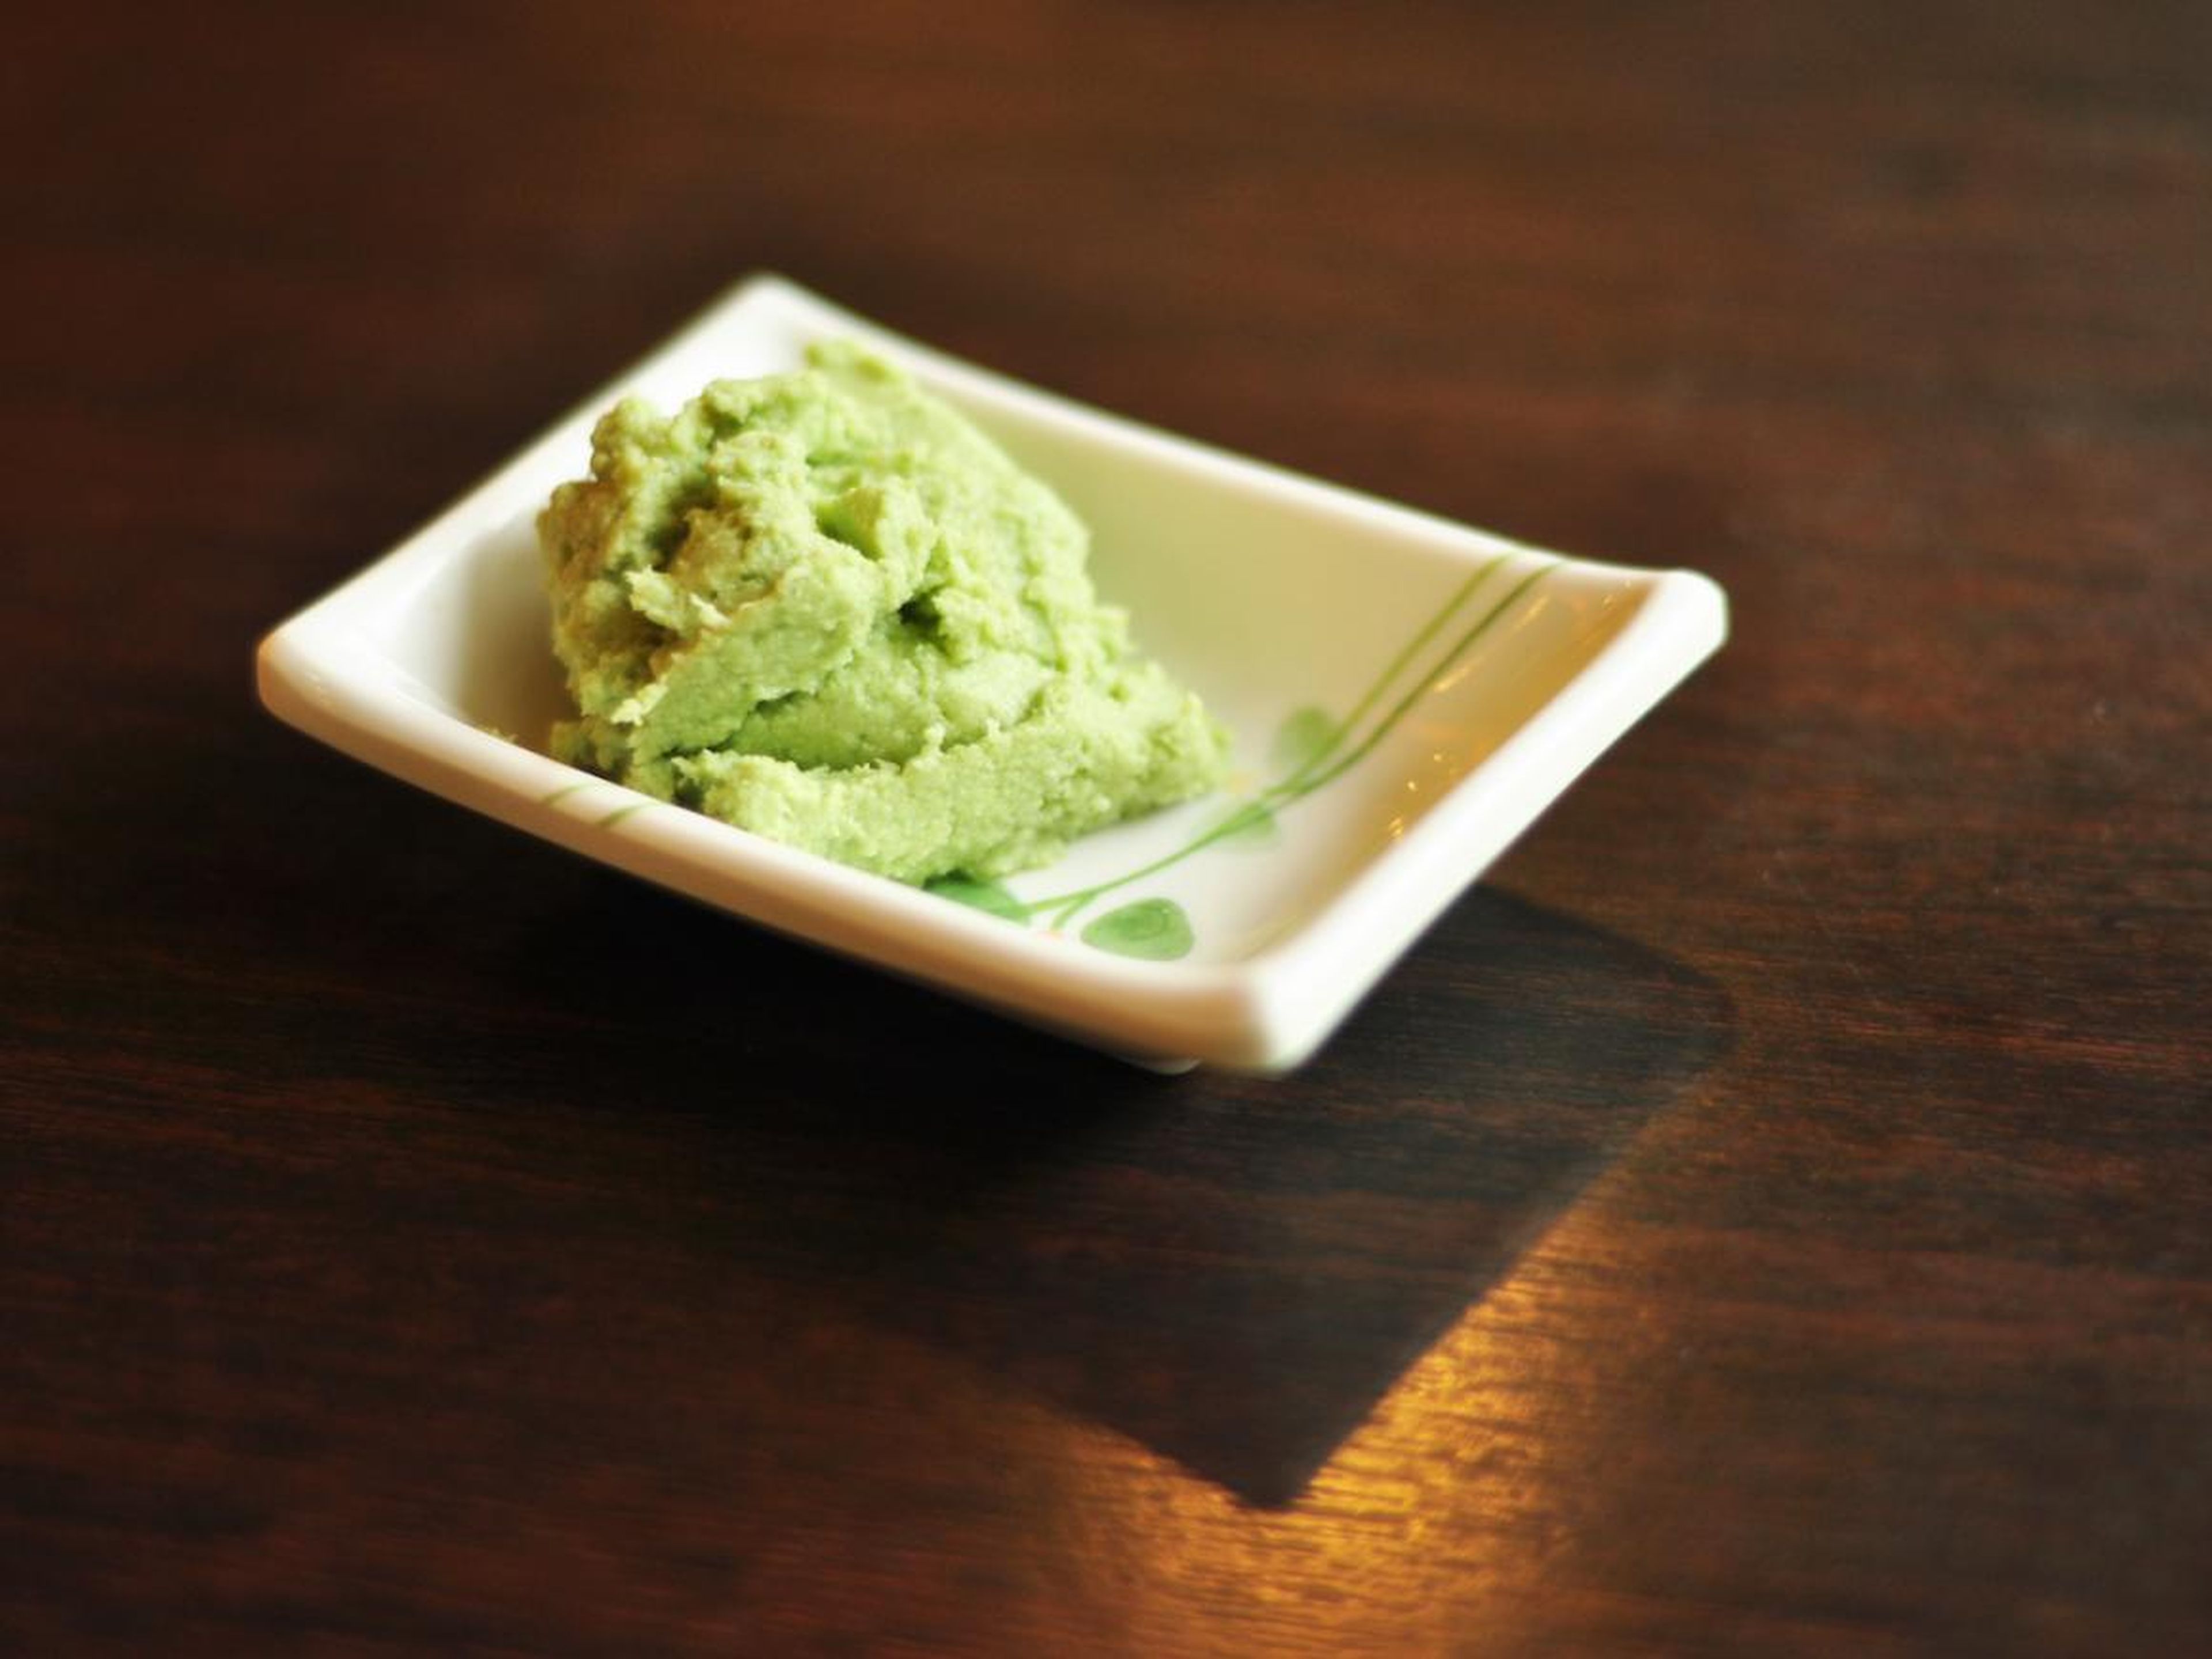 Real wasabi is much rarer than what you're eating.